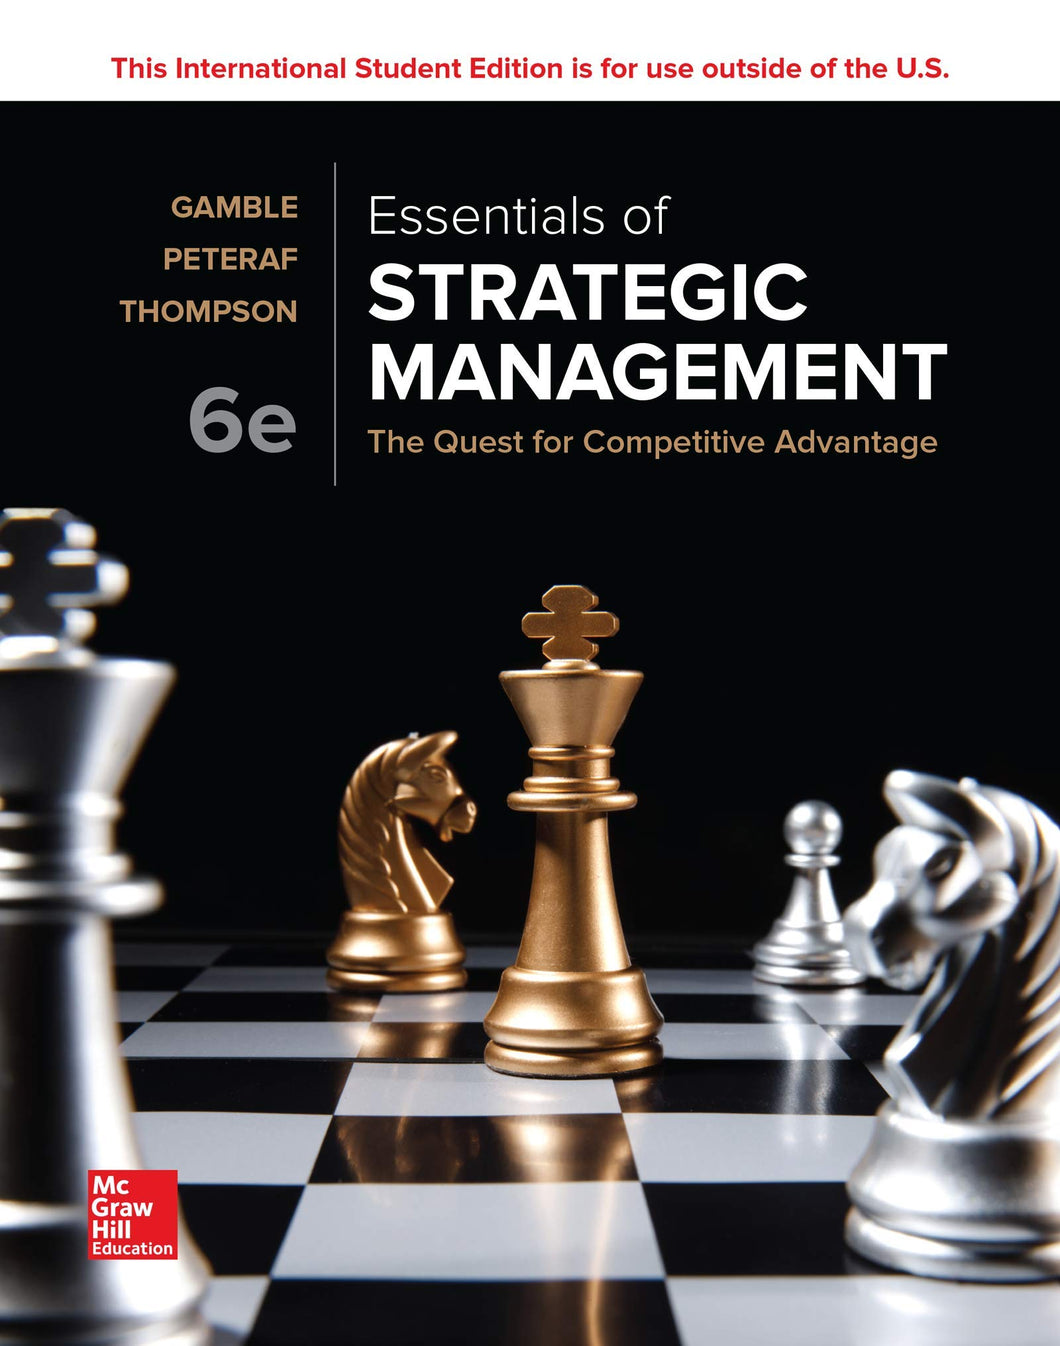 Essentials of Strategic Management: The Quest for Competitive Advantage [Paperback] 6e by Gamble, John - Smiling Bookstore :-)